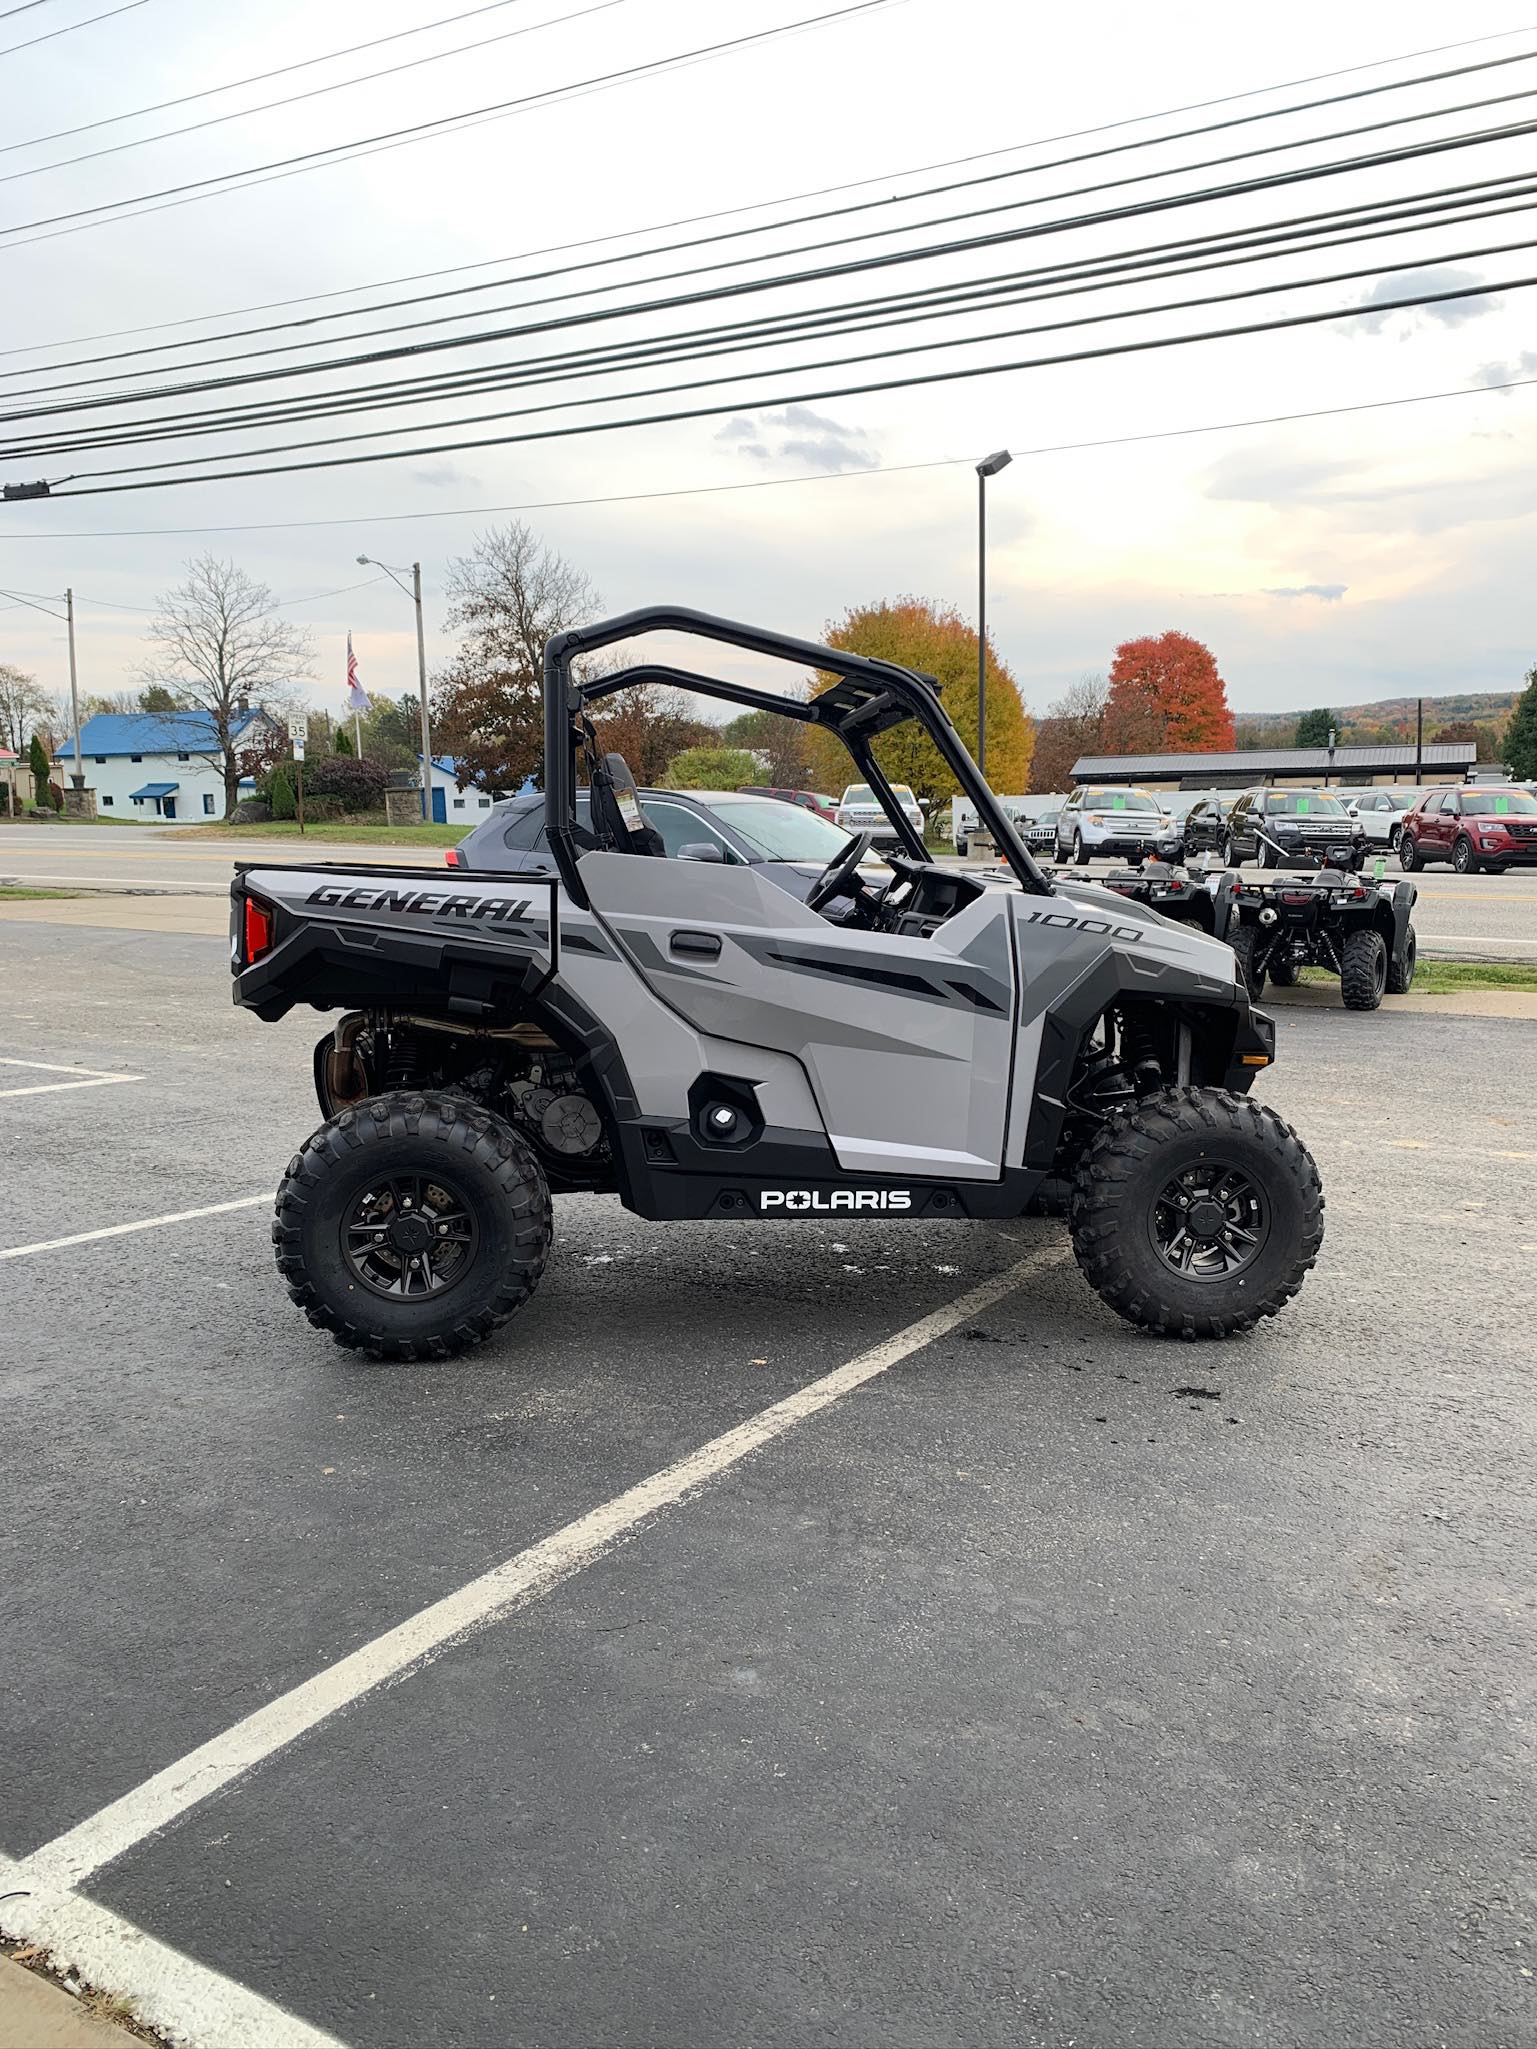 2024 Polaris GENERAL 1000 Sport at Leisure Time Powersports of Corry